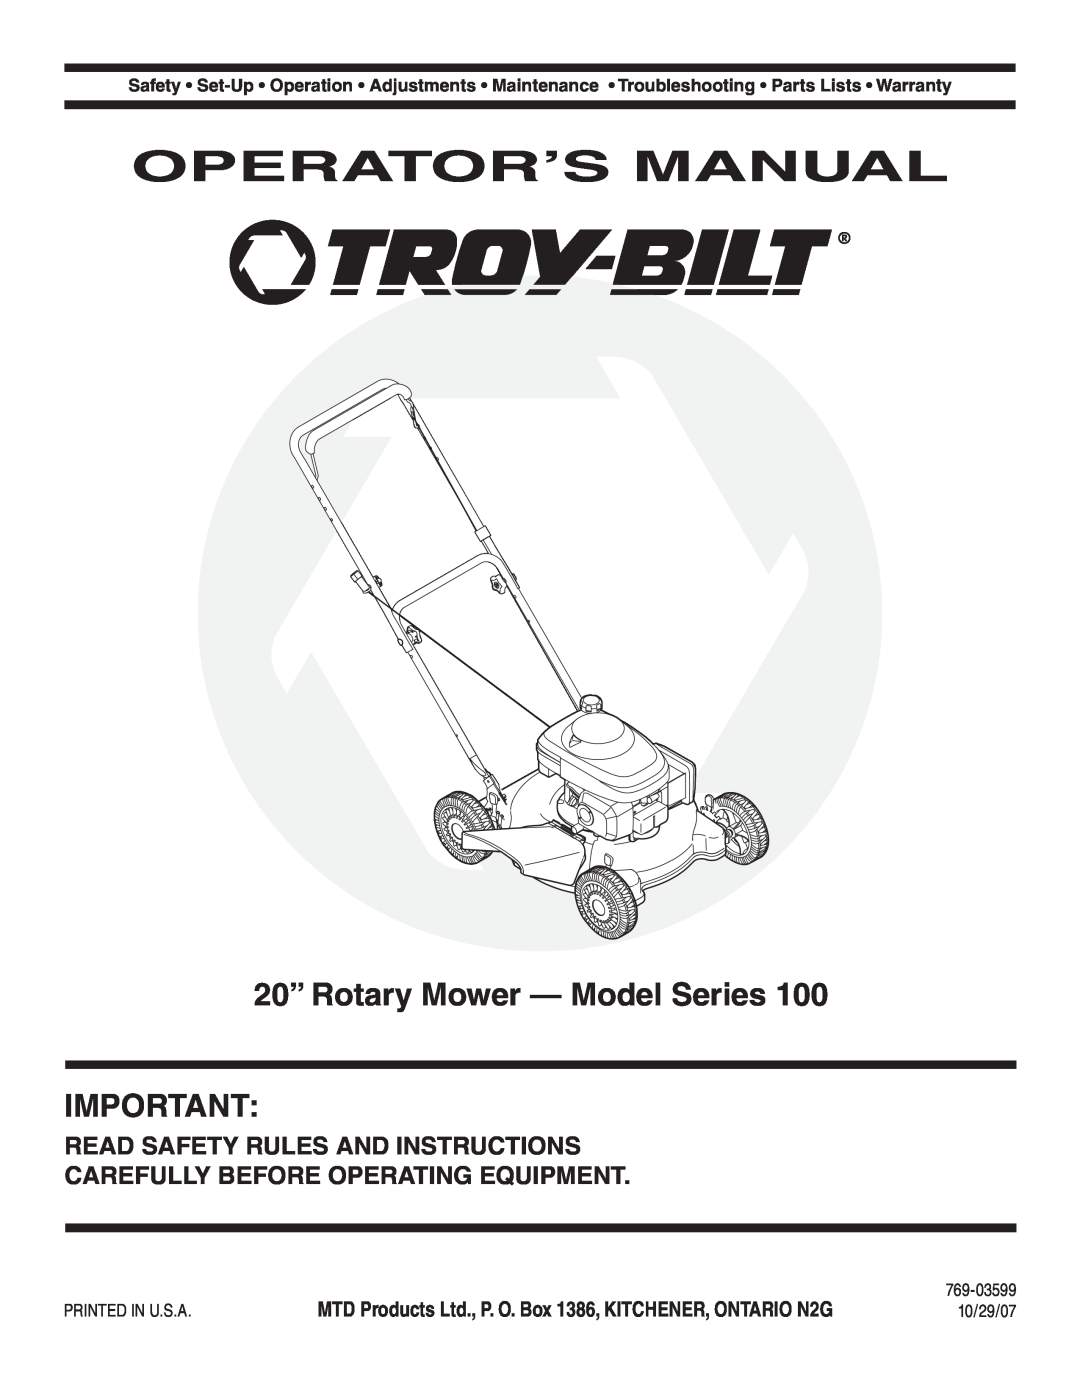 Bolens 100 warranty Operator’S Manual, 20” Rotary Mower - Model Series, Read Safety Rules And Instructions 